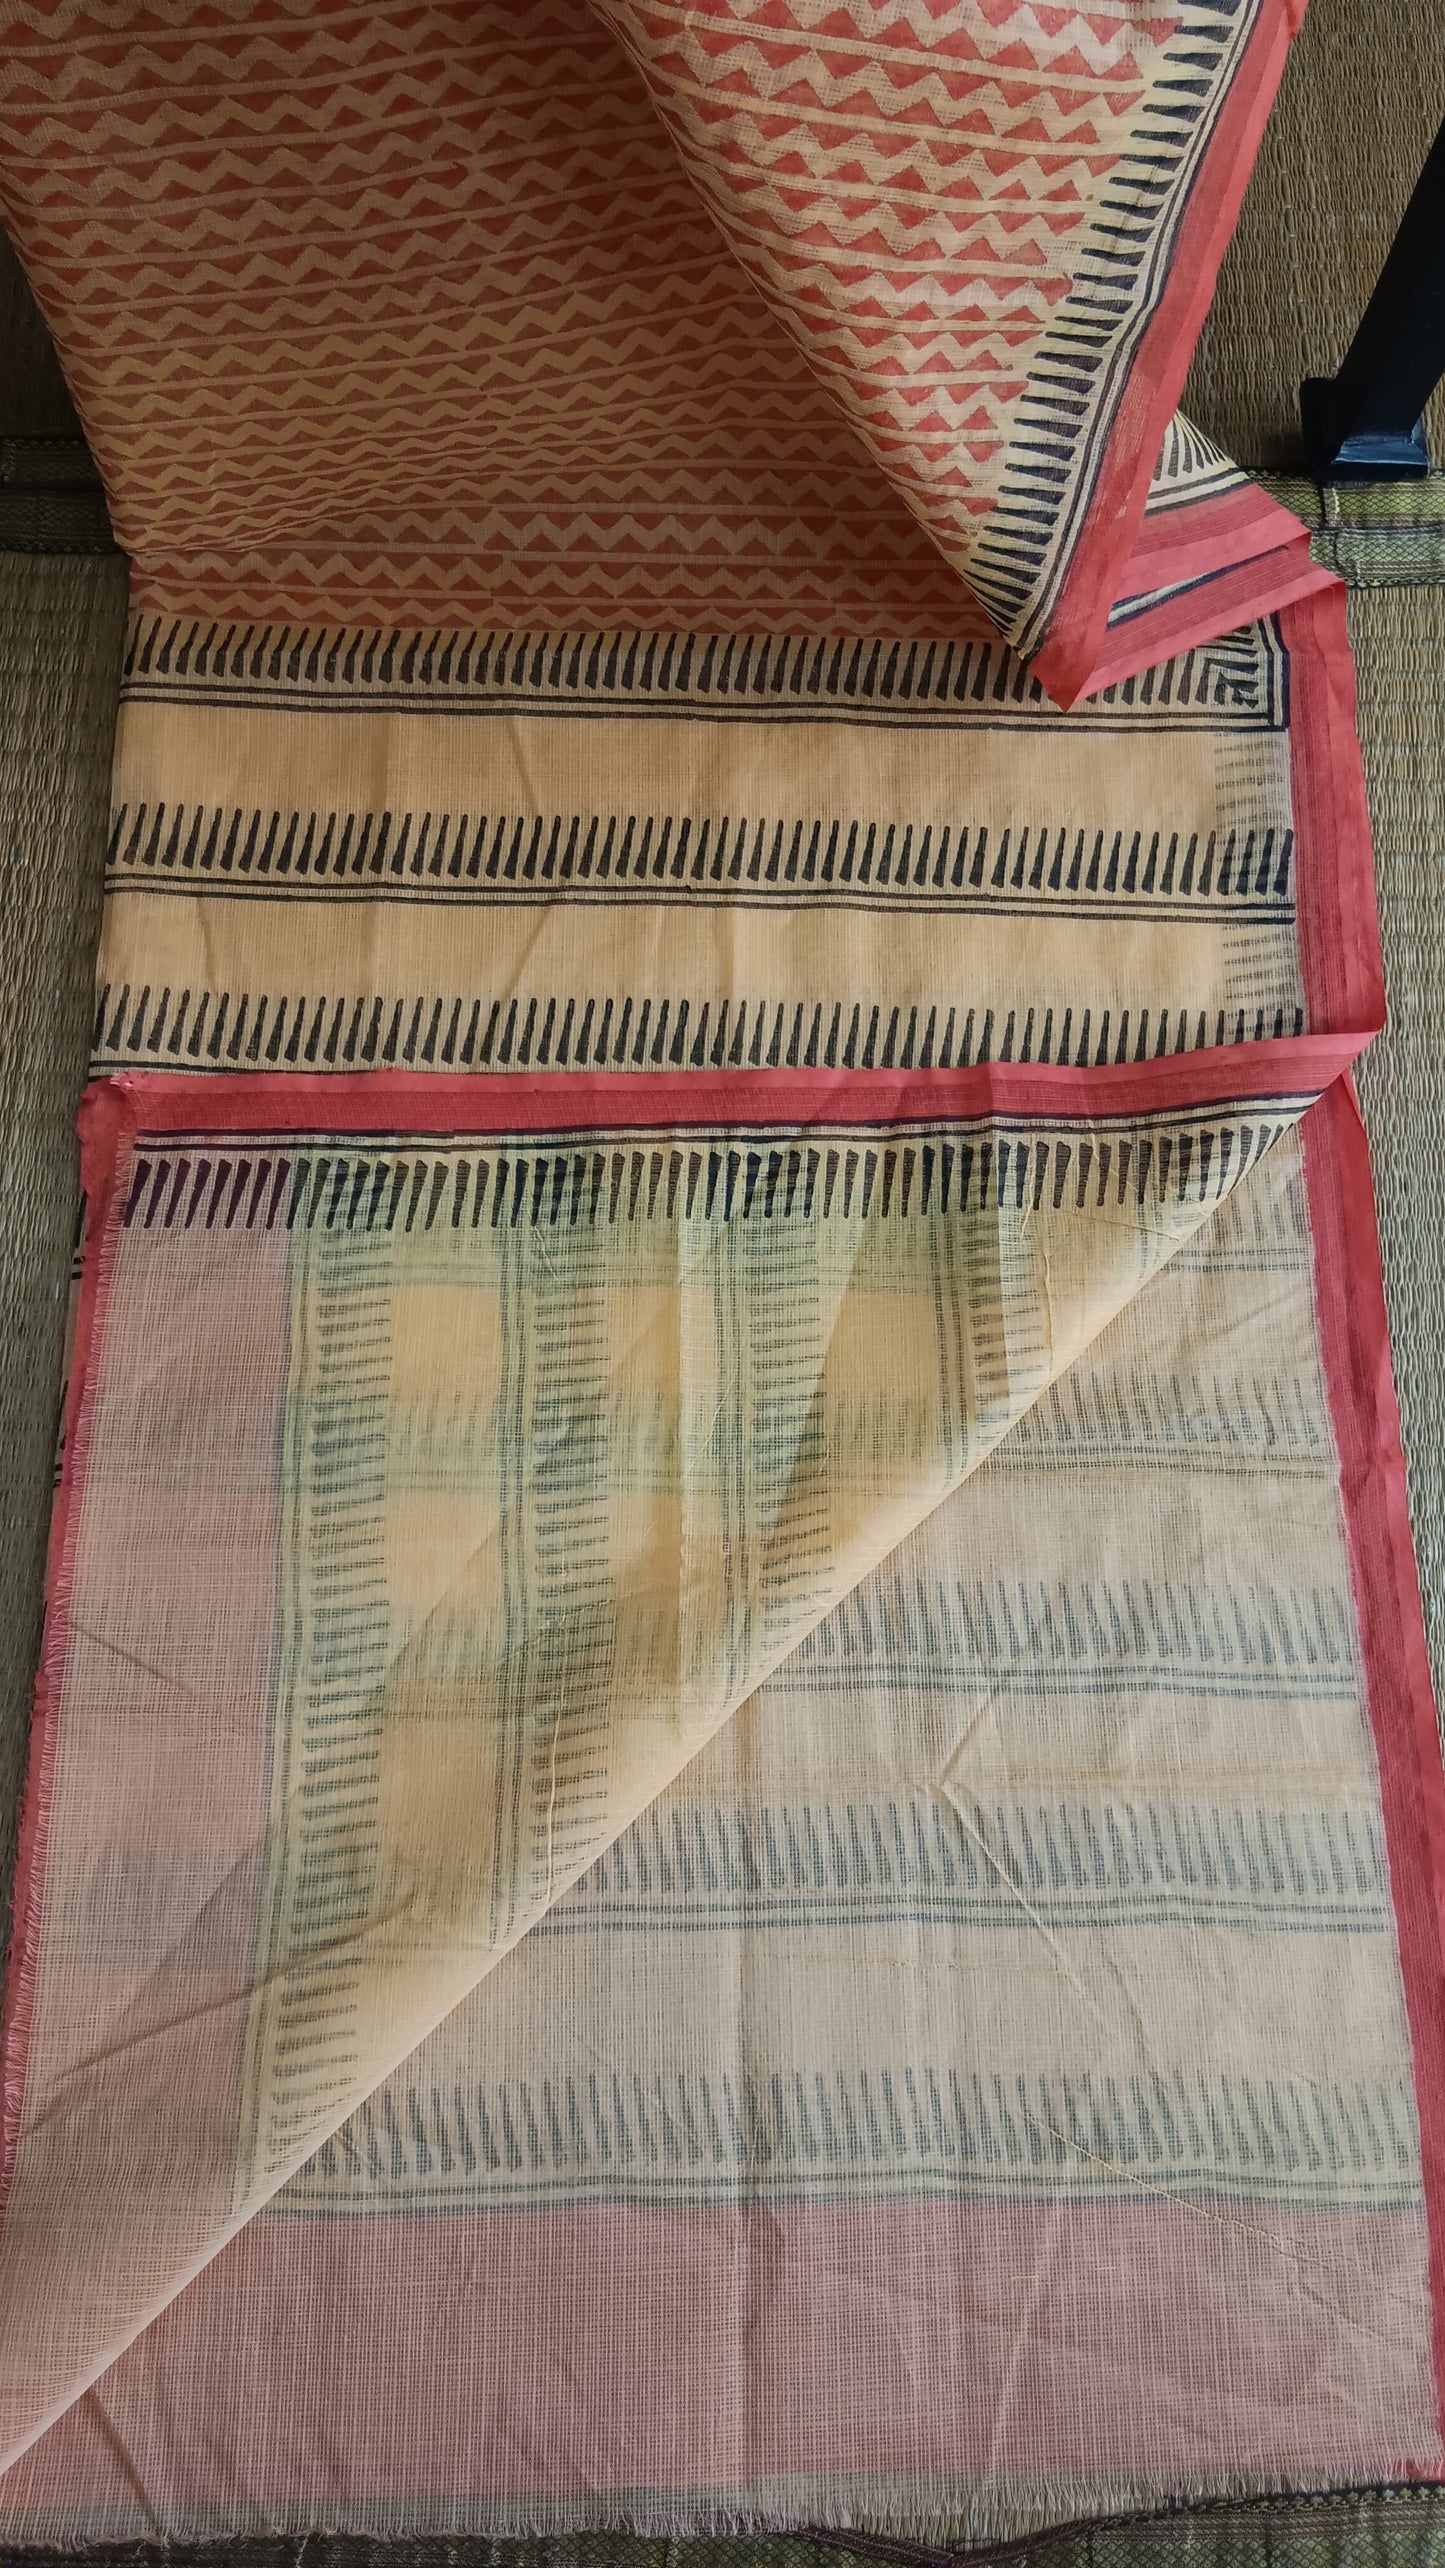 View from the top of the plain blouse of a daily wear kota cotton saree